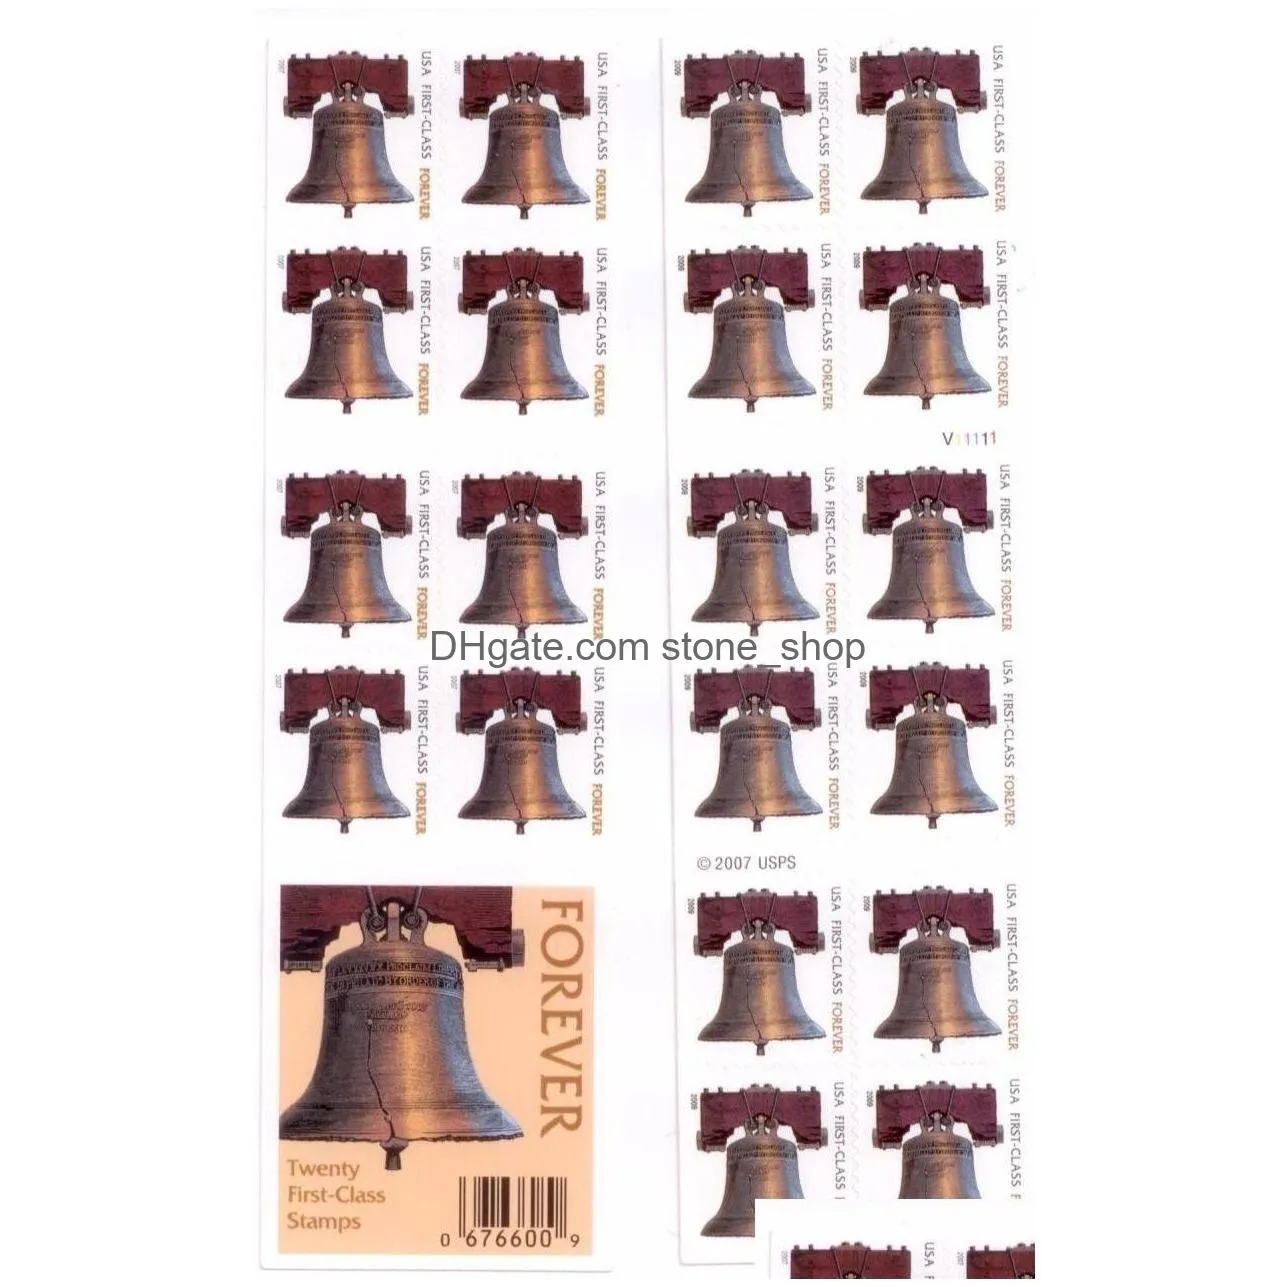 other jewelry sets stamps liberty bell booklet of 20 drop delivery amksl